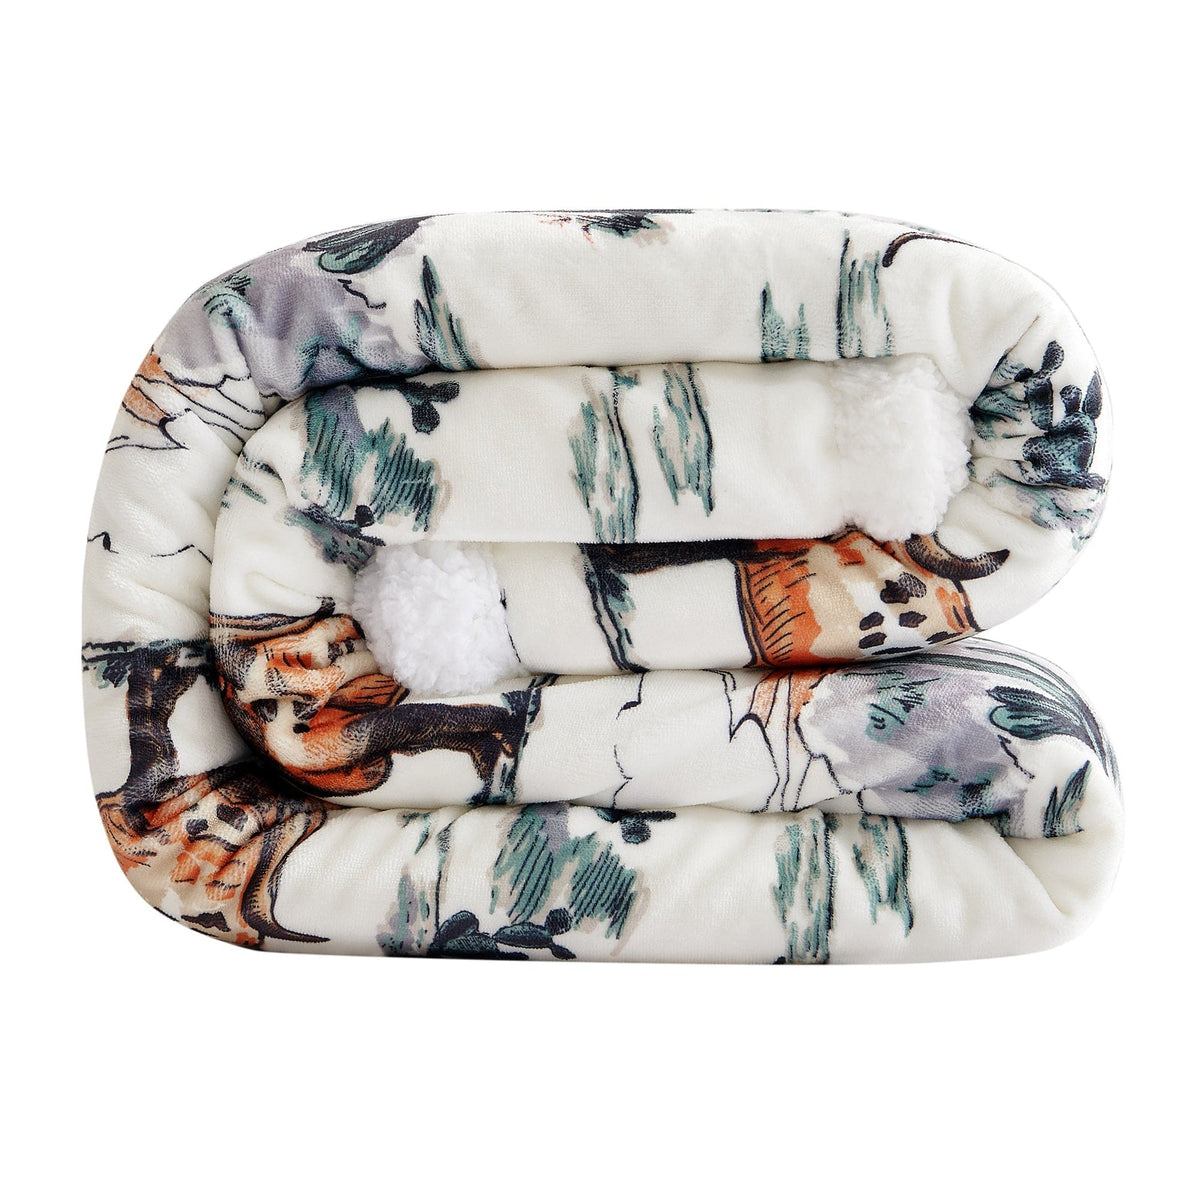 Ranch Life Western Toile Sherpa Throw